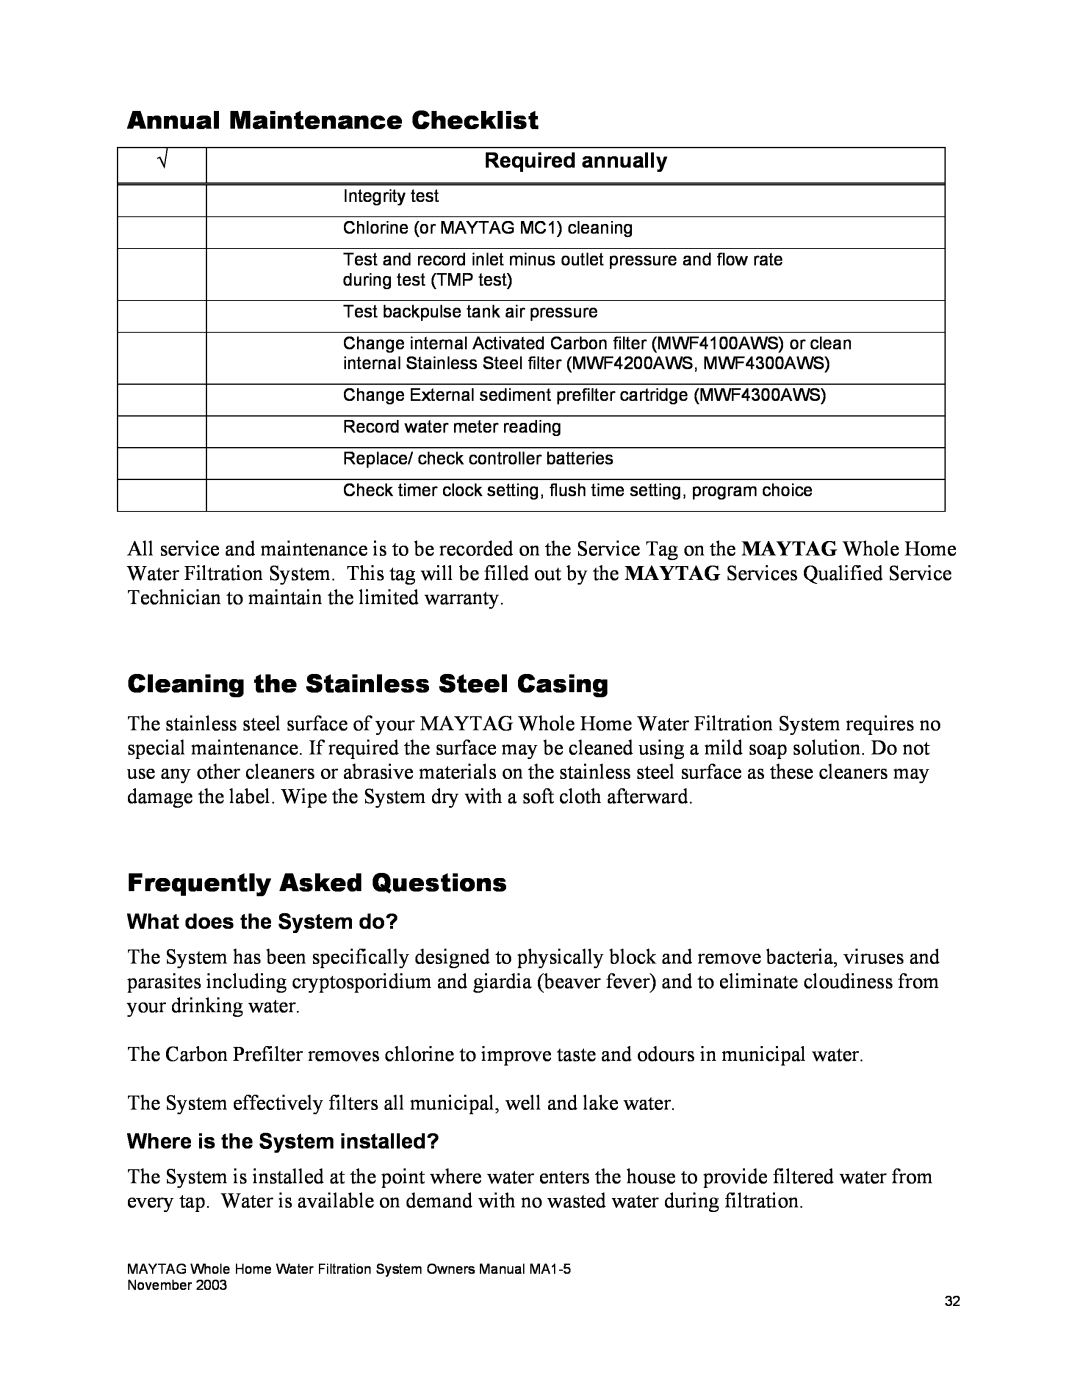 Maytag mwf4100aws Annual Maintenance Checklist, Cleaning the Stainless Steel Casing, Frequently Asked Questions 